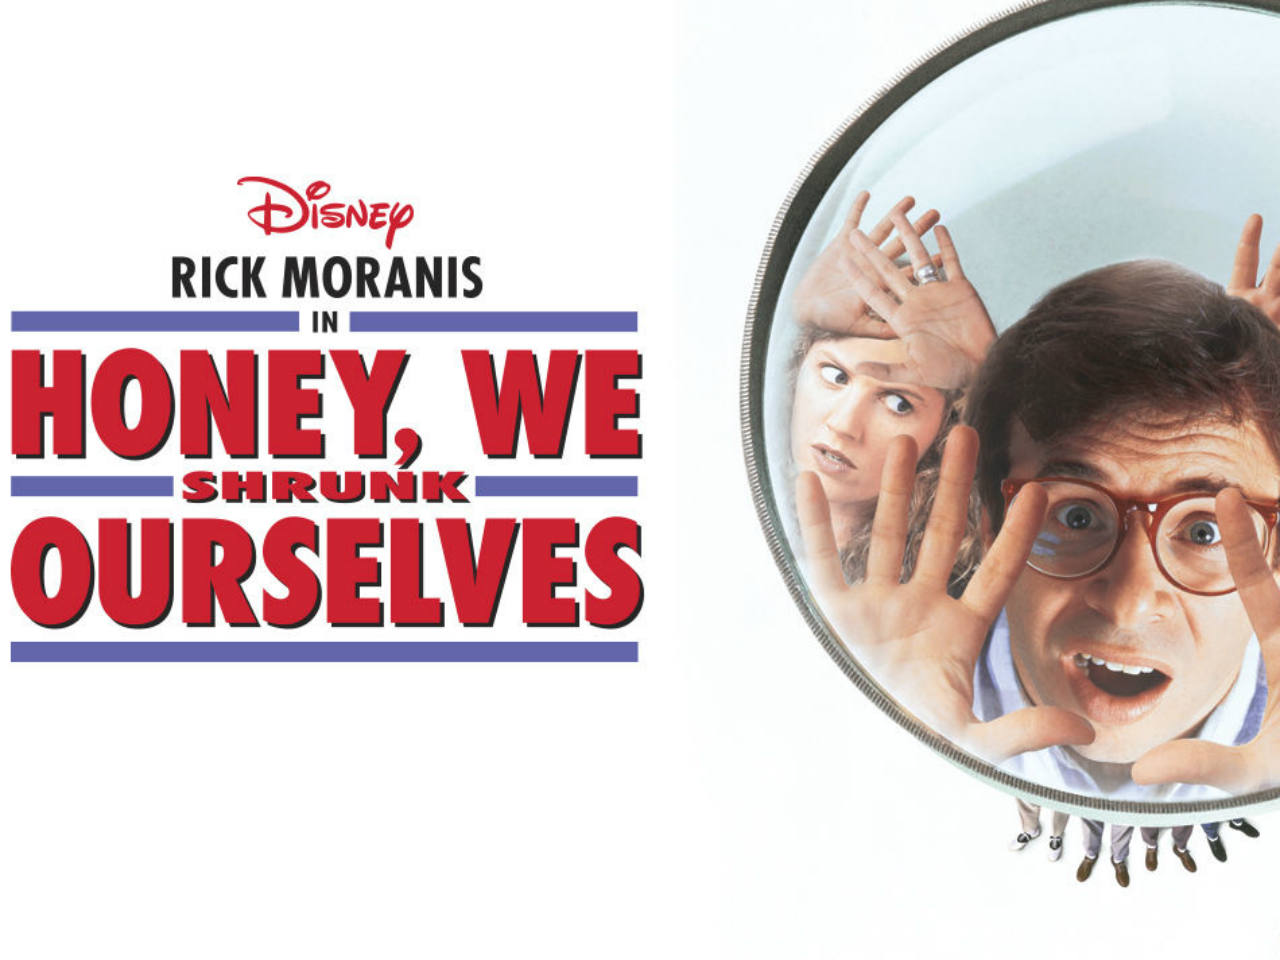 A movie poster of the kids' movie Honey we shrunk ourselves